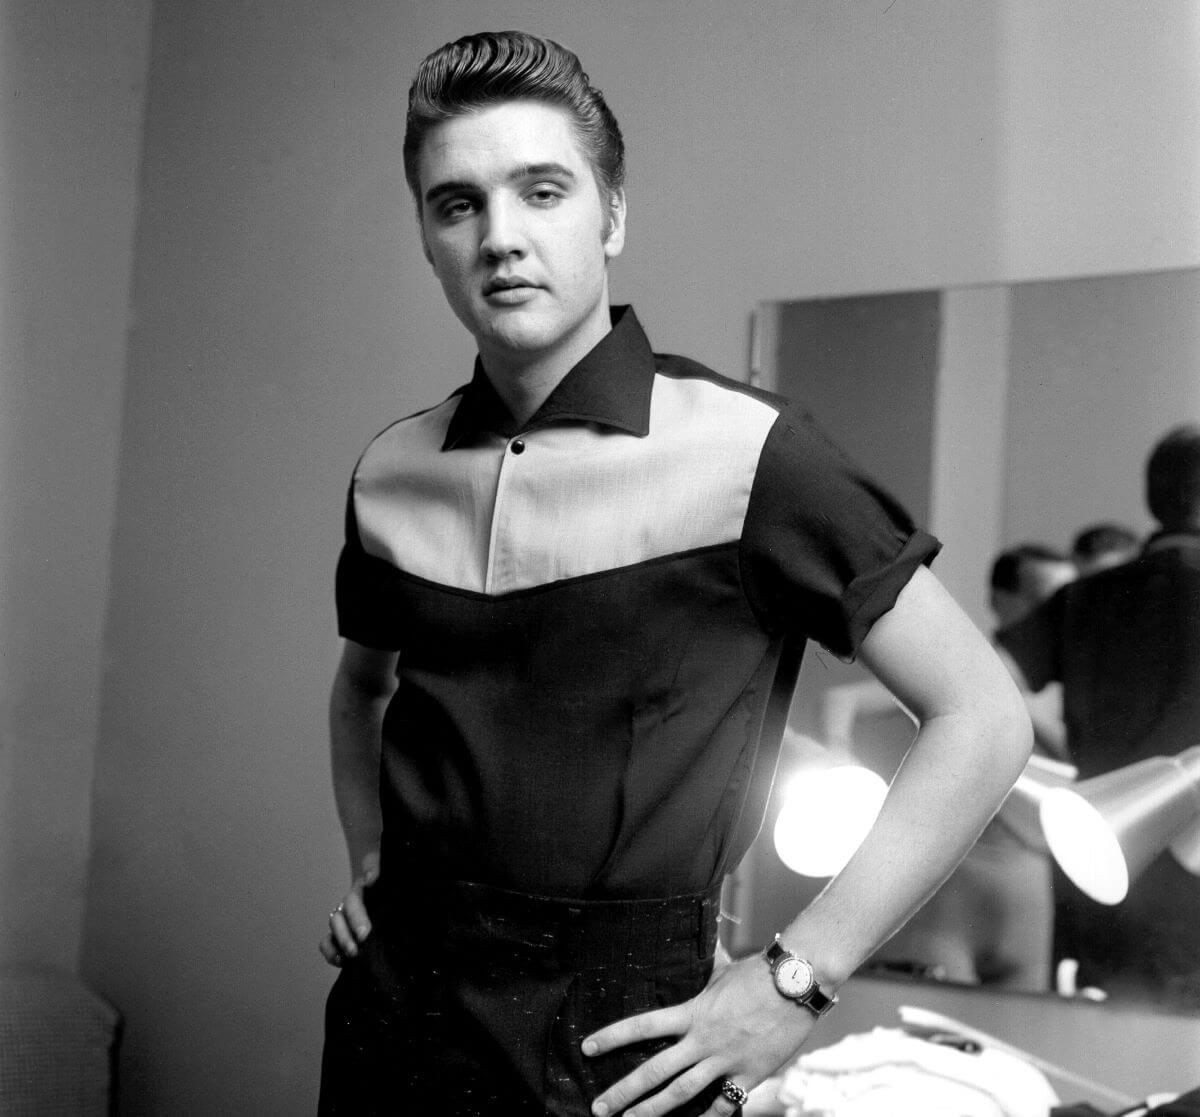 A black and white picture of Elvis standing with his hands on his hips.